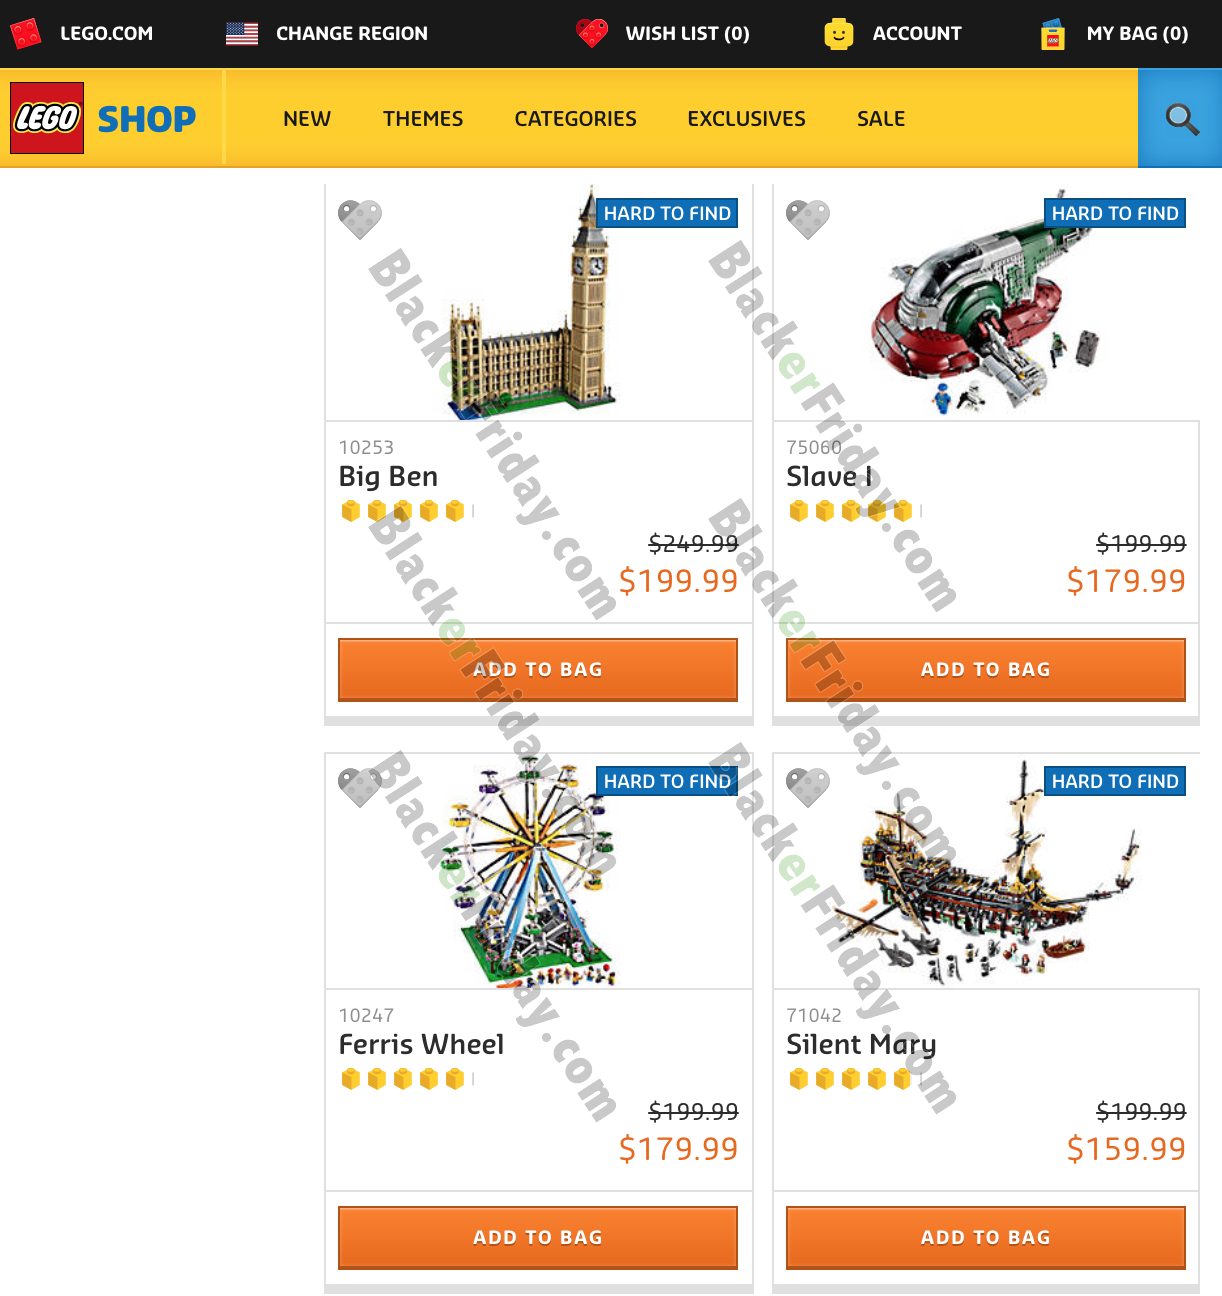 Lego Black Friday 2020 Sale - What to Expect - Blacker Friday